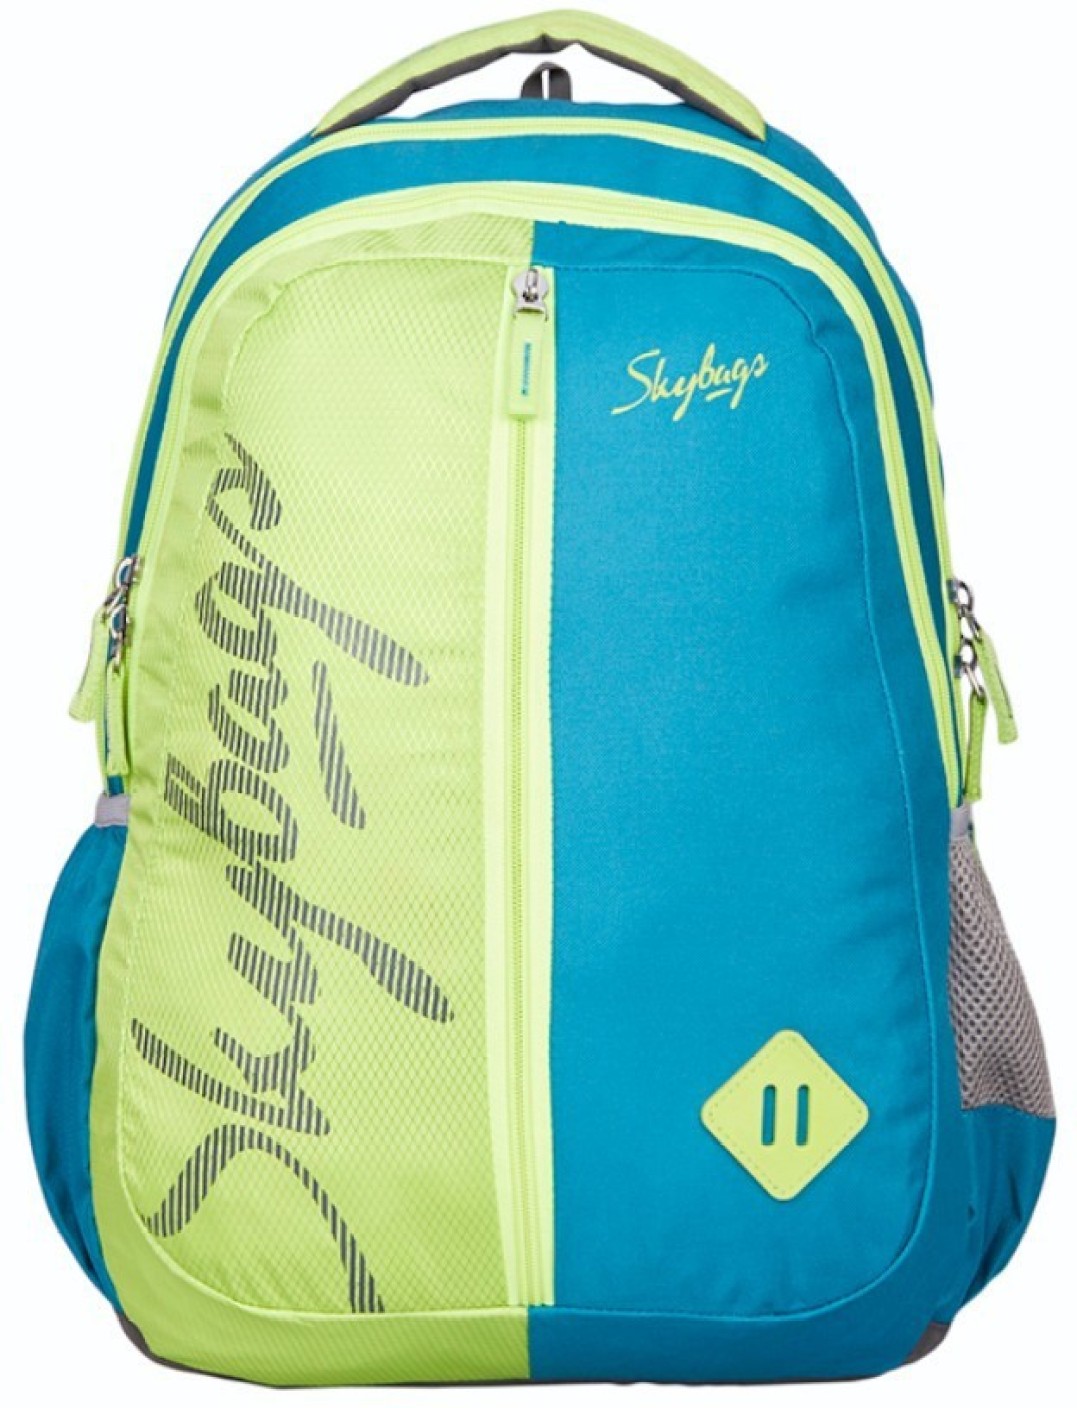 skybags lowest price